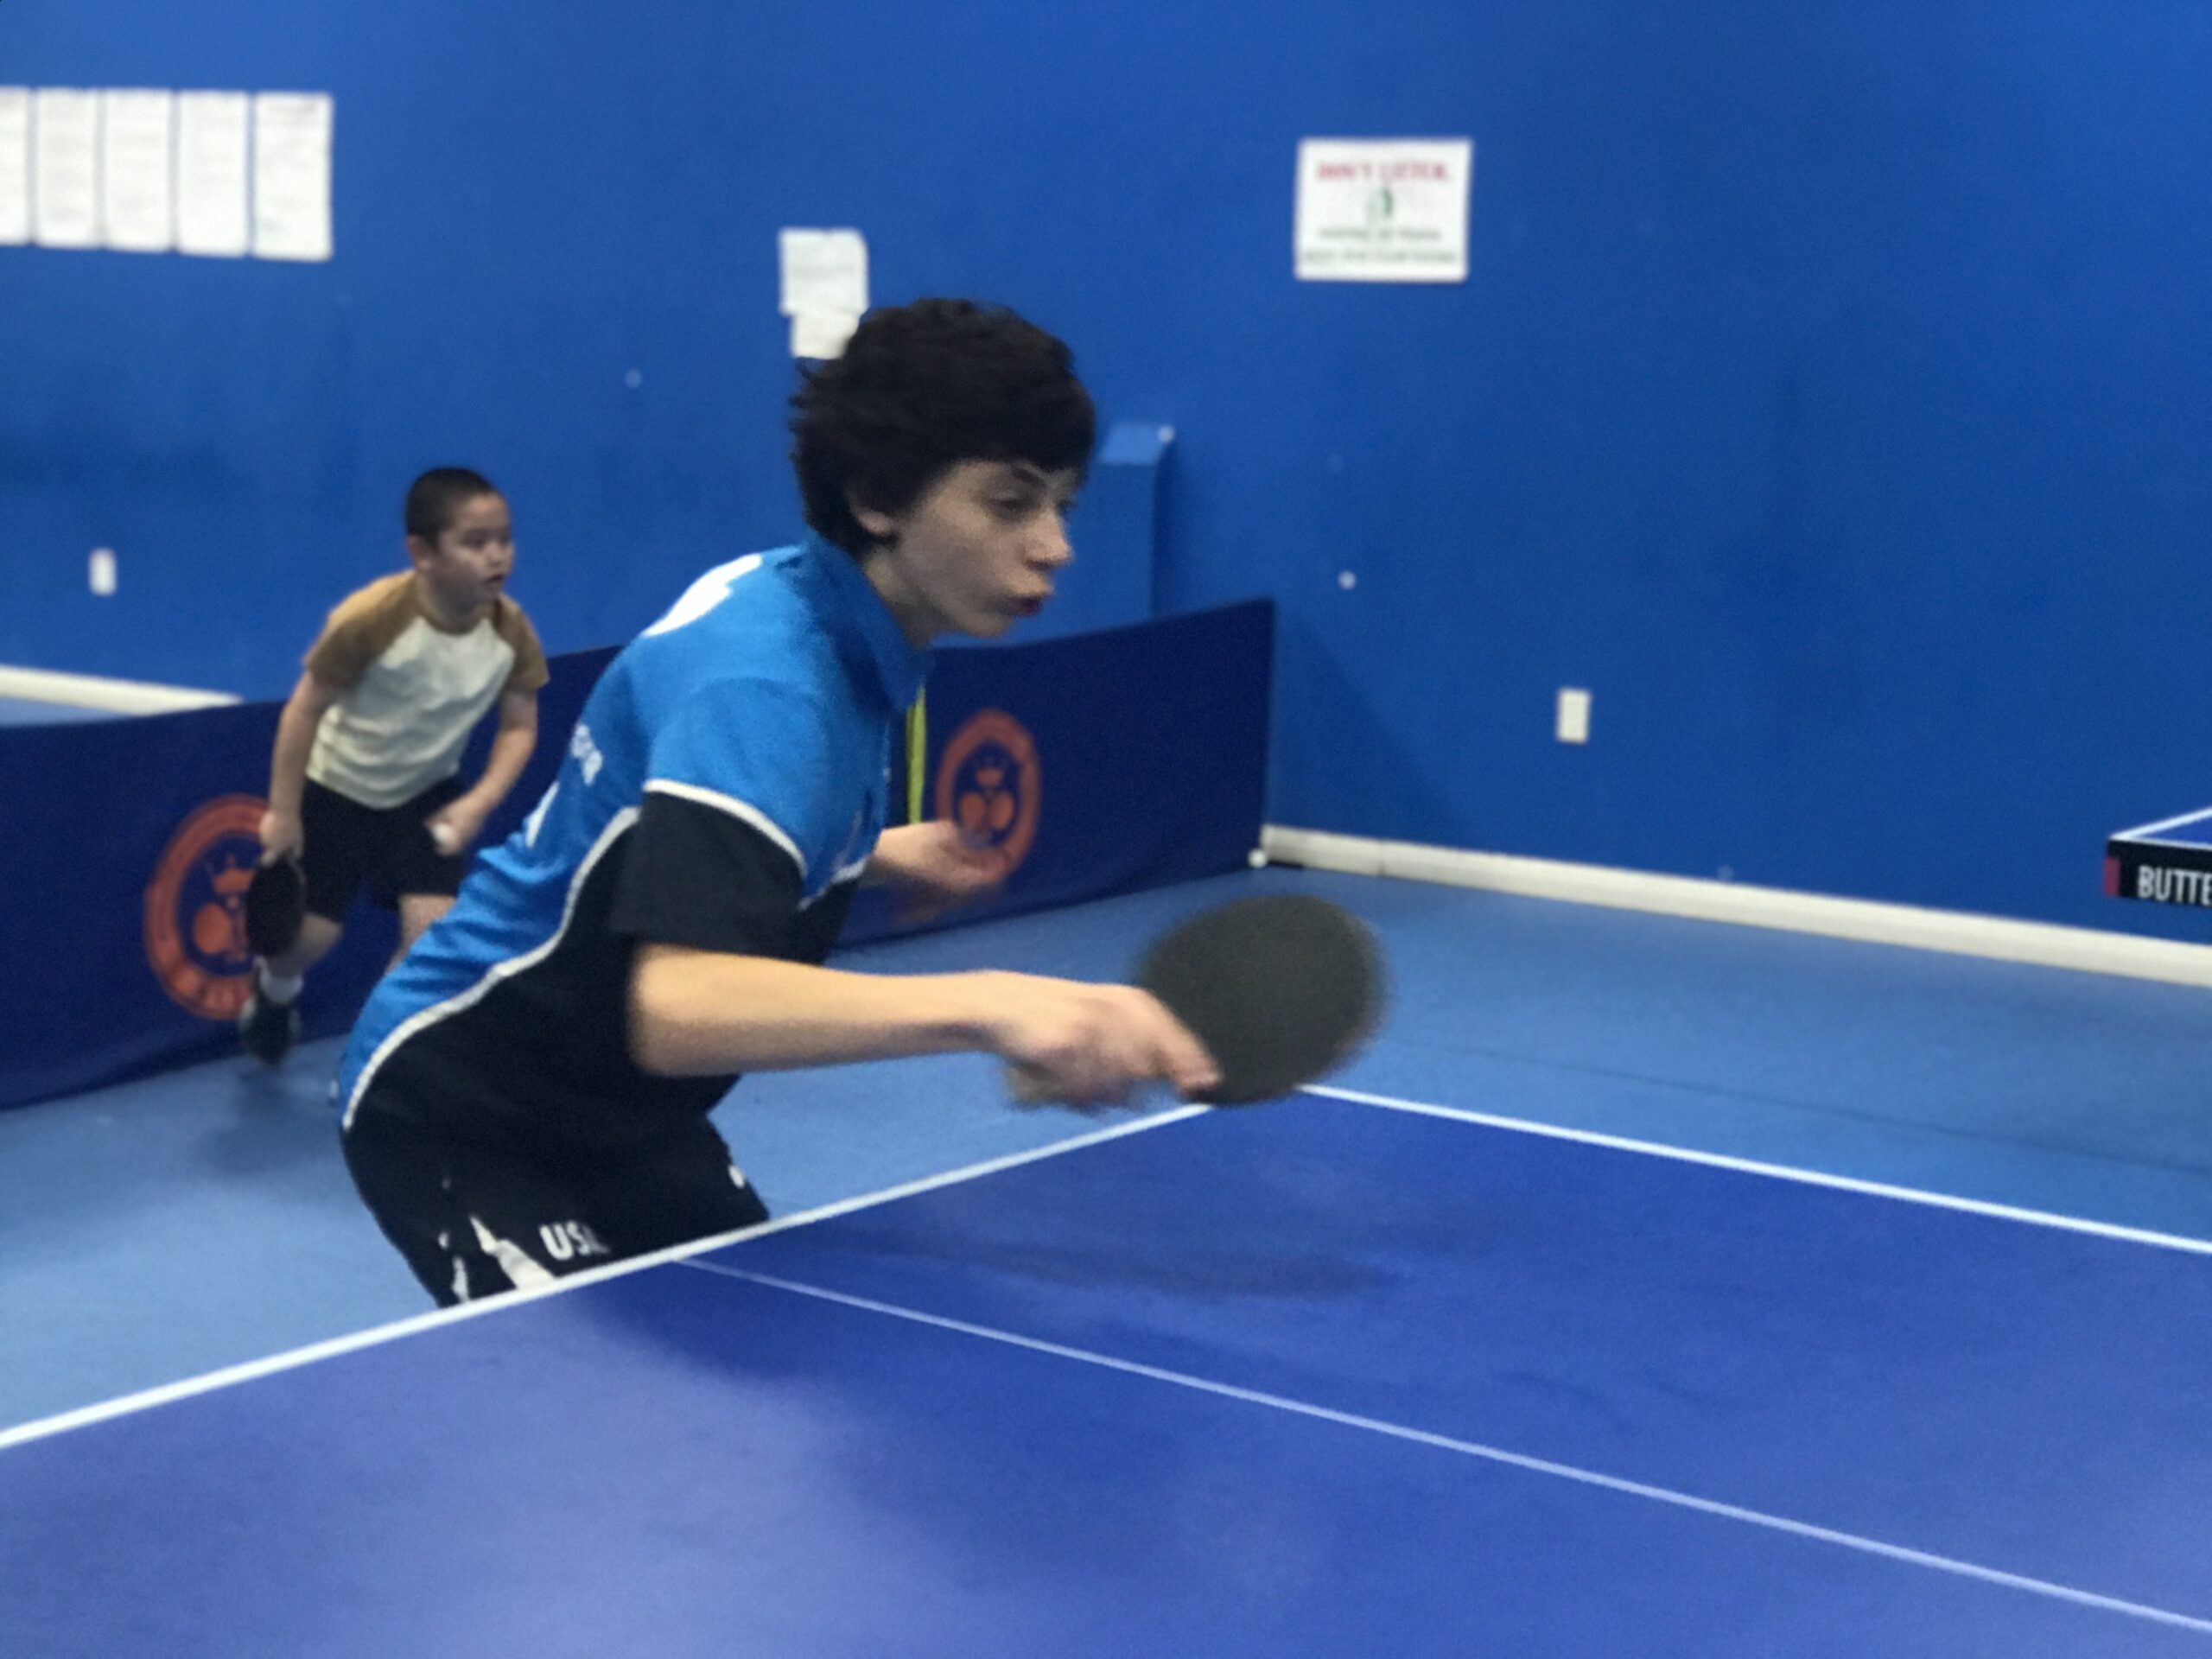 Cole getting ready to return a serve at HITTA tournament November 2023